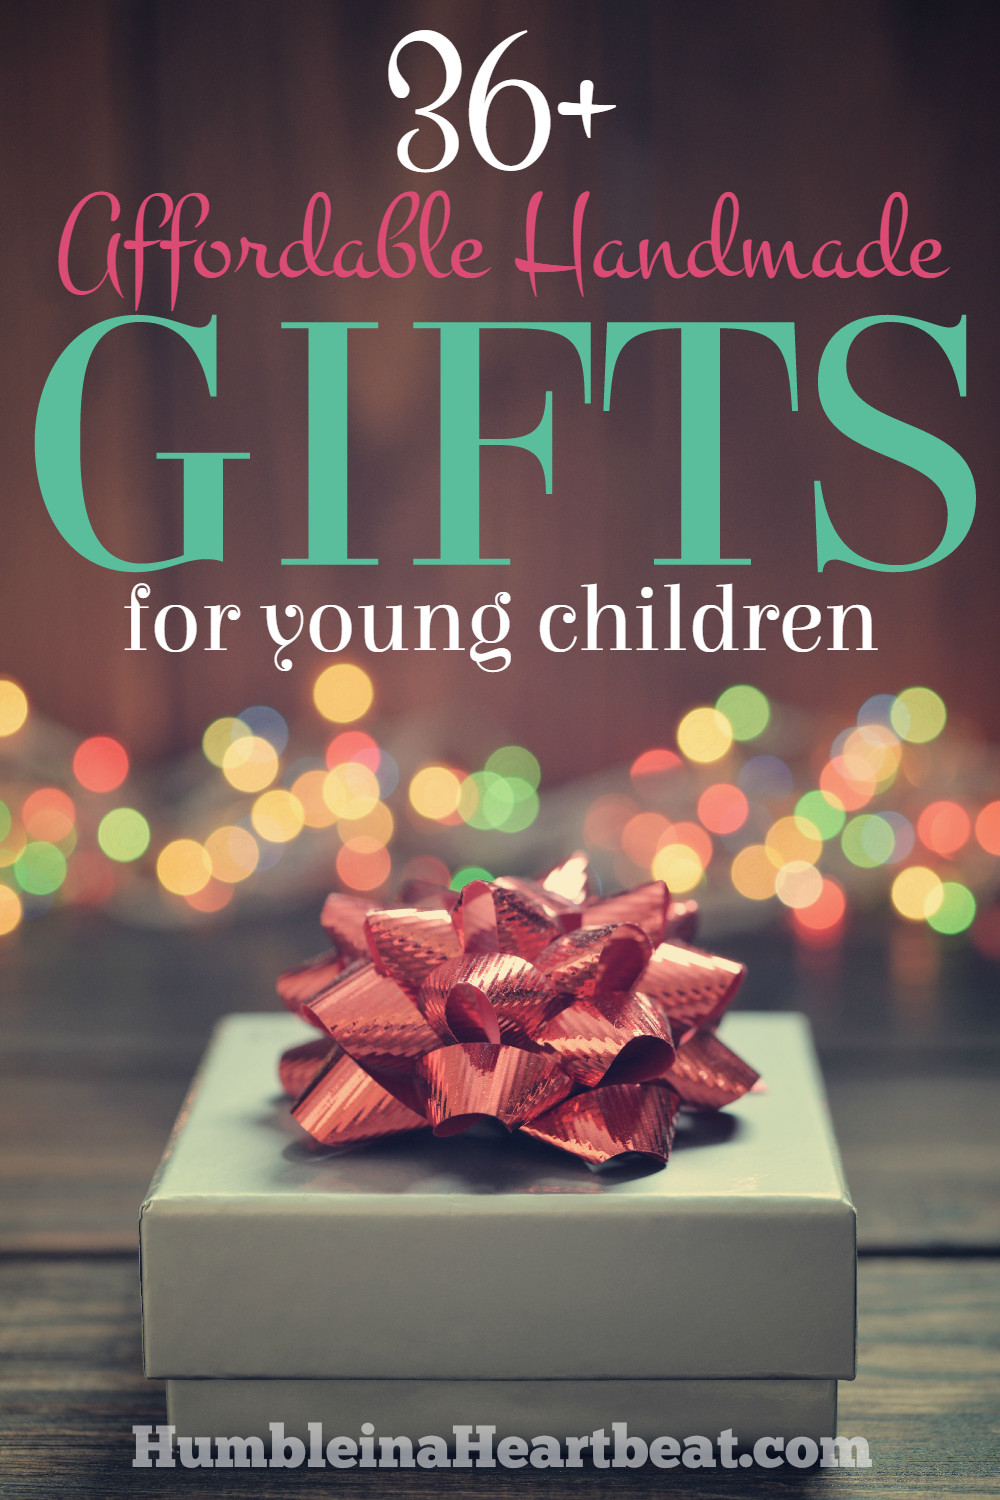 Affordable Gifts For Kids
 36 Affordable Handmade Gift Ideas for Young Children